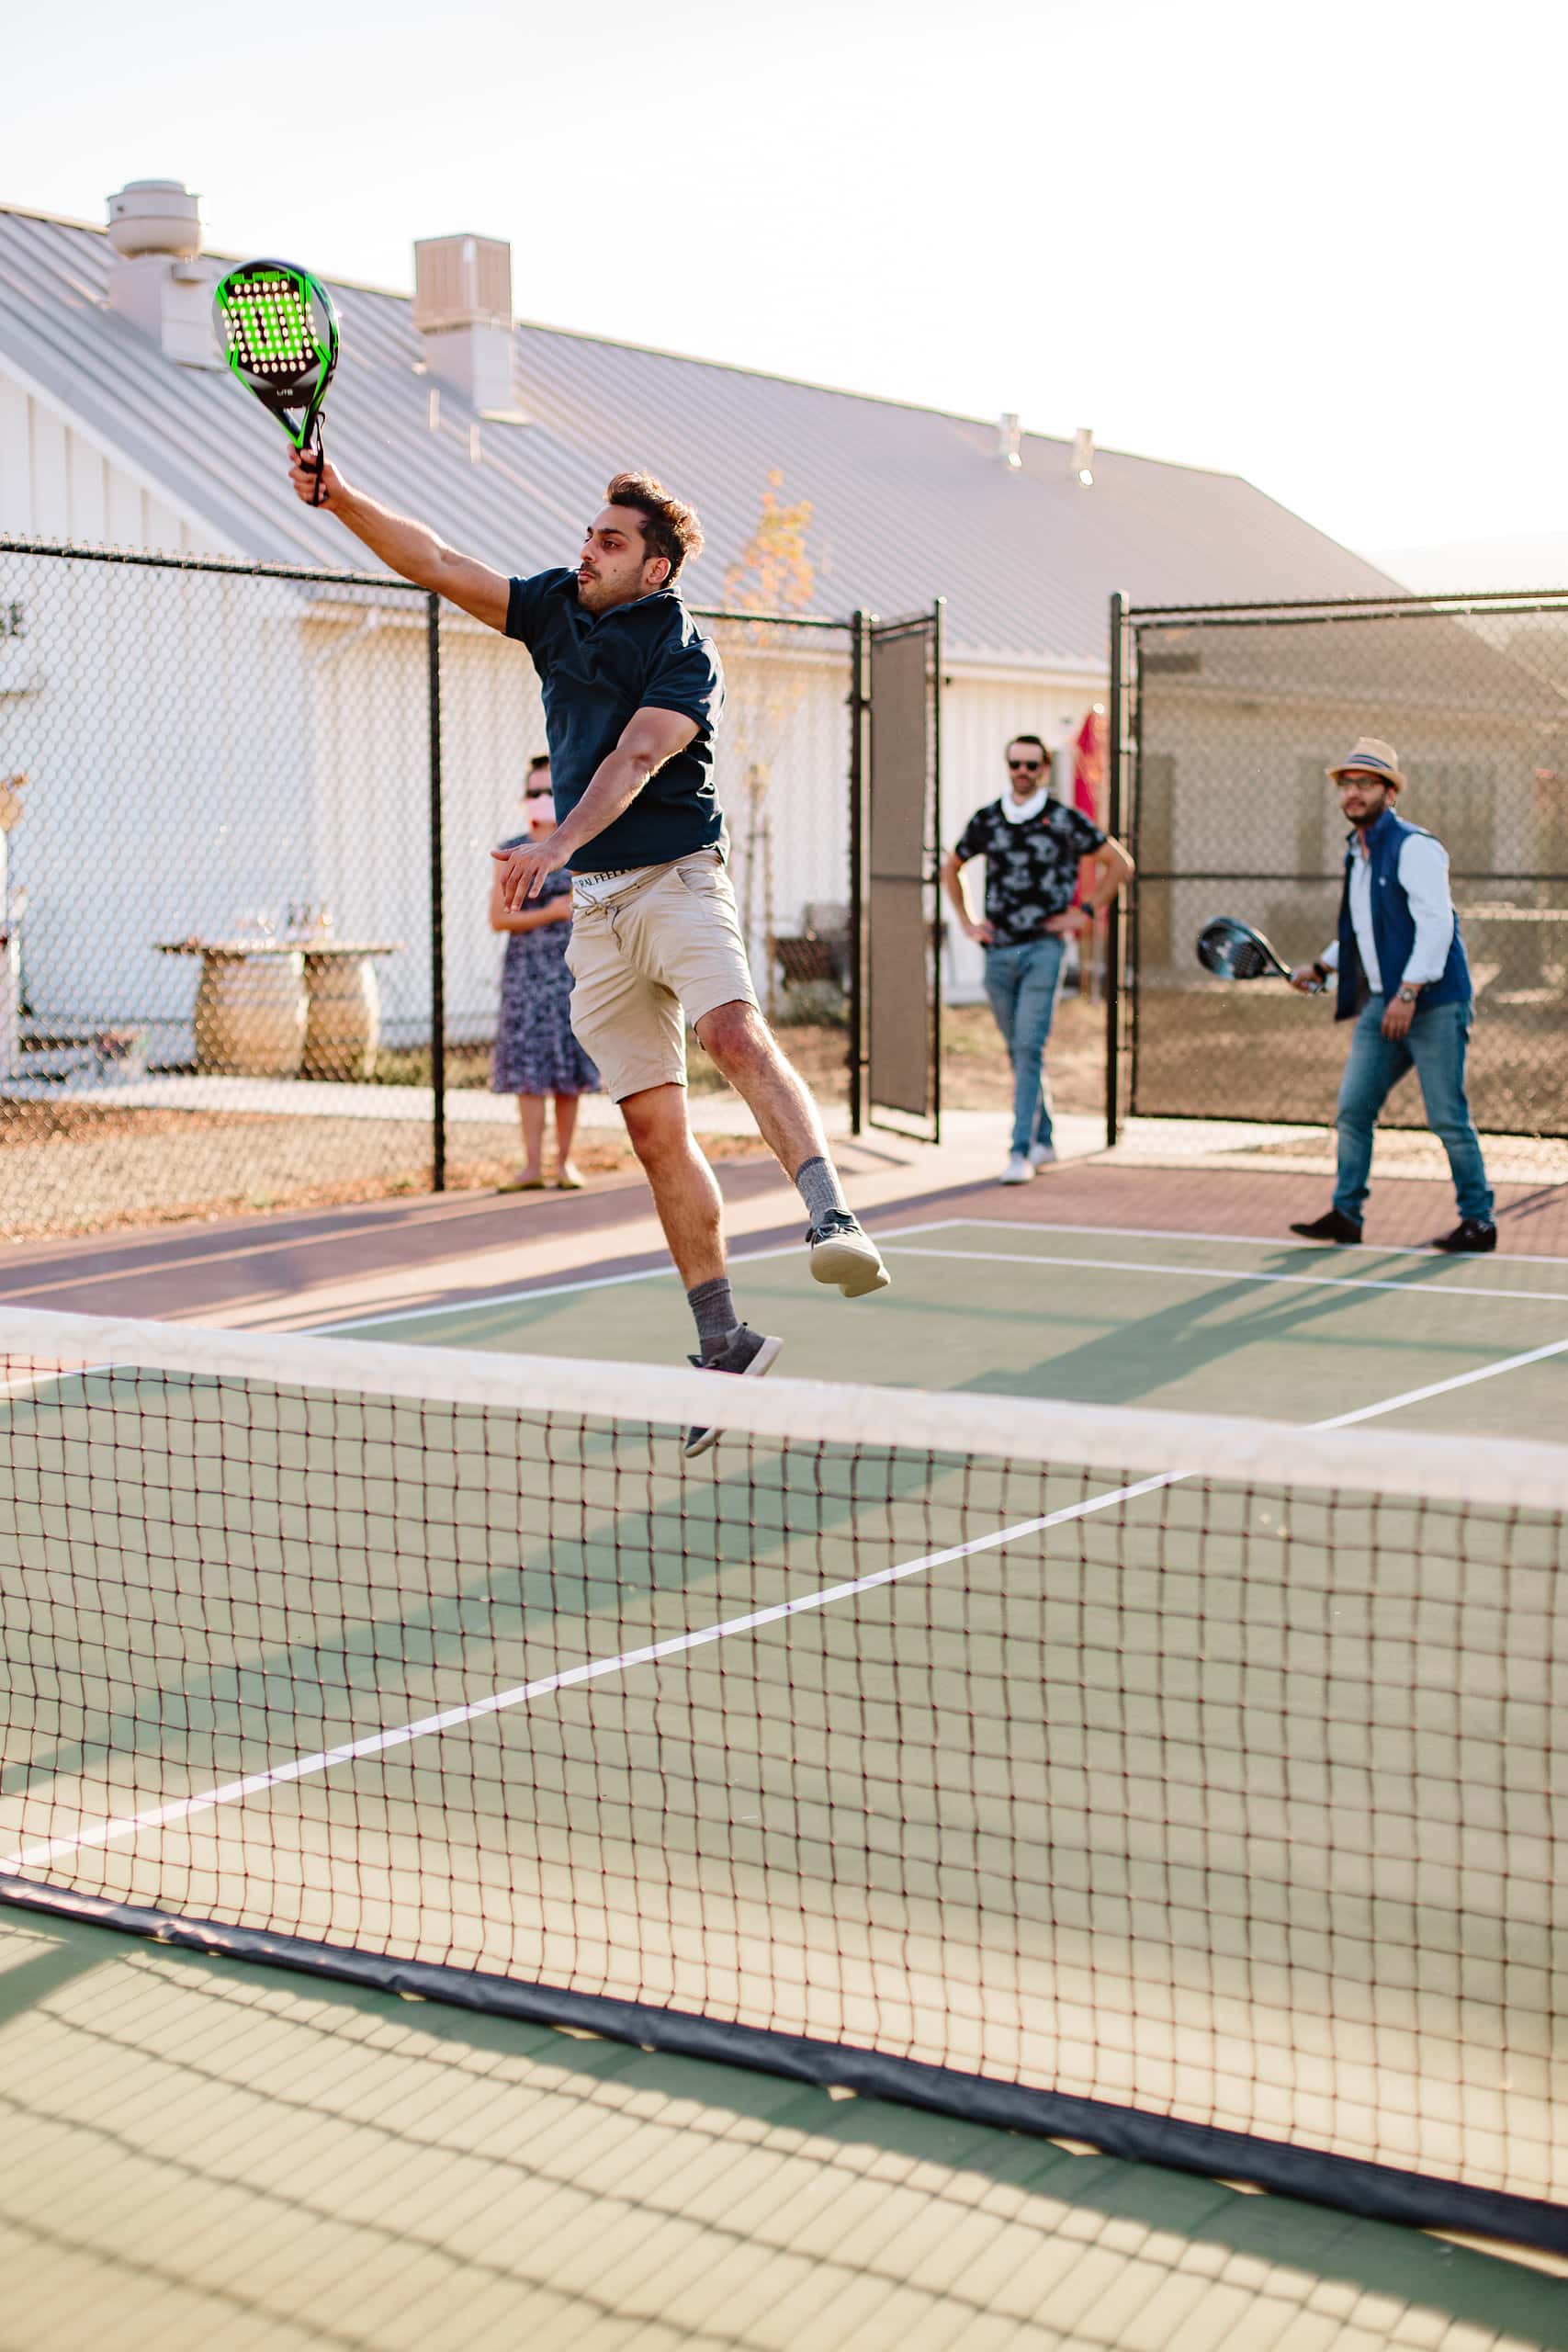 A group of people play tennis.